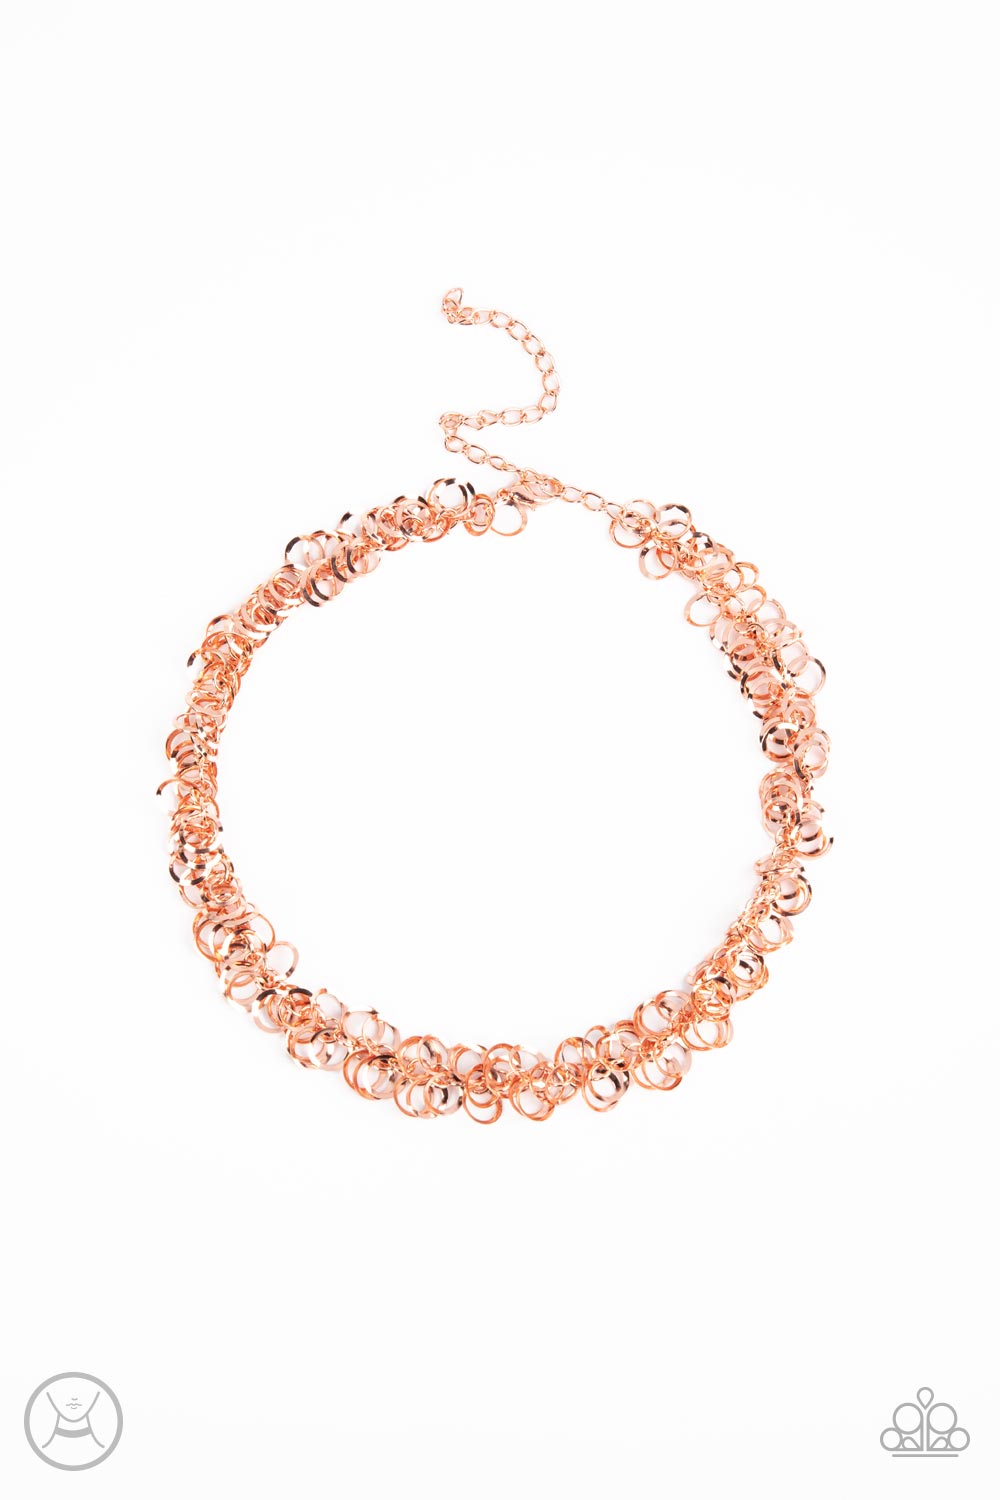 Cause a Commotion - Copper Paparazzi Necklace